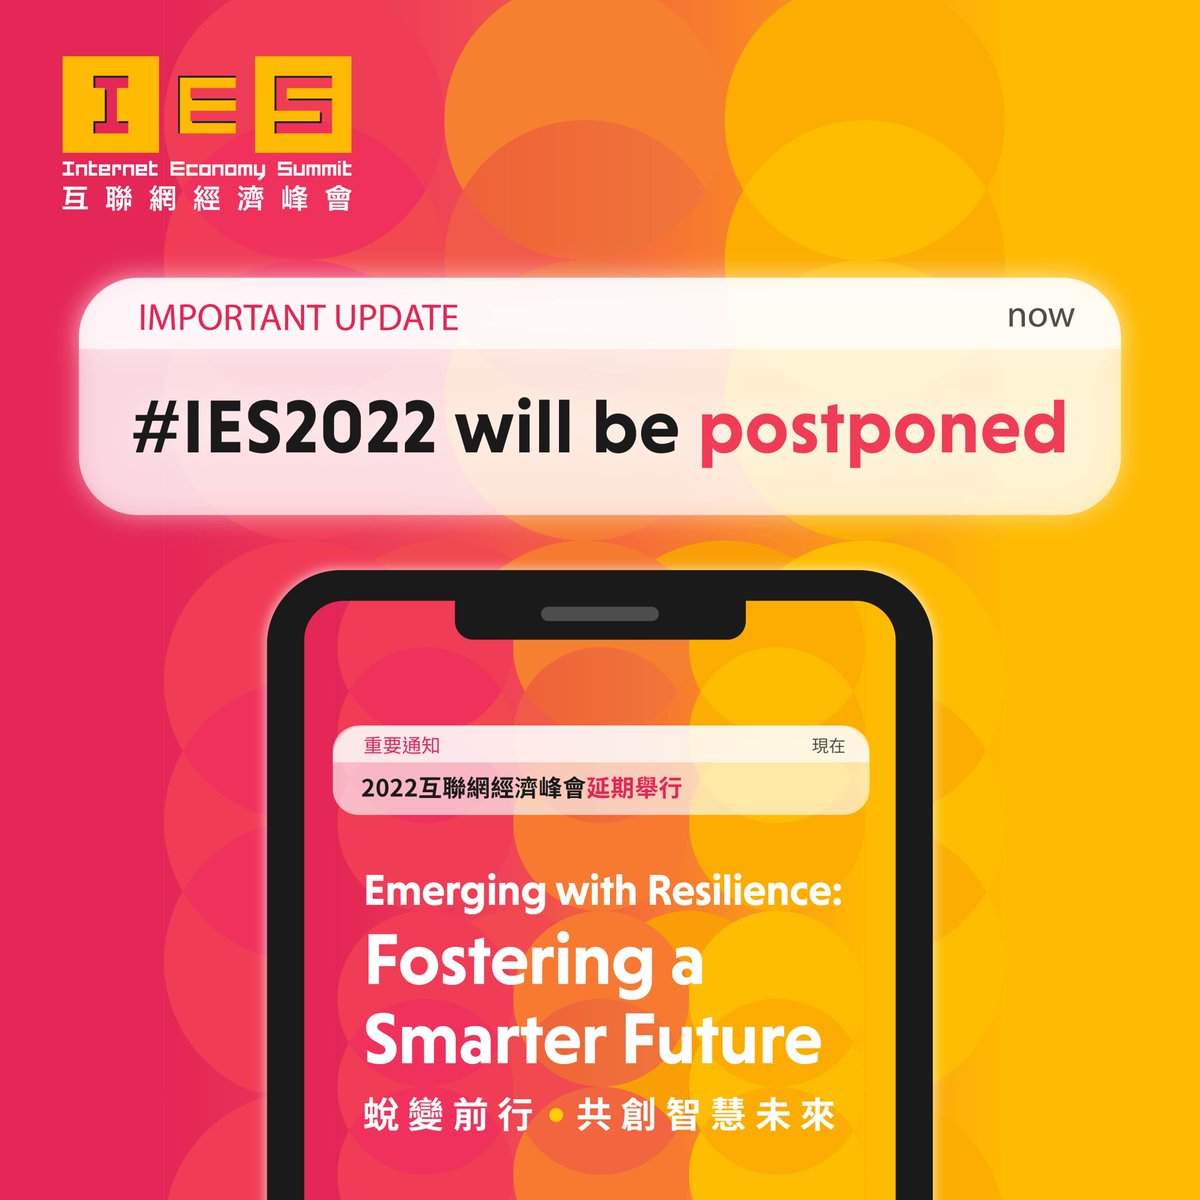 In view of the recent critical development of COVID-19 in HK, the #IES2022 will be postponed. Please stay tuned for more updates! For ticketing arrangements or other enquiries, please contact ies@cyberport.hk for assistance. #IES #smarteconomy #StaySafe #StayHealthy